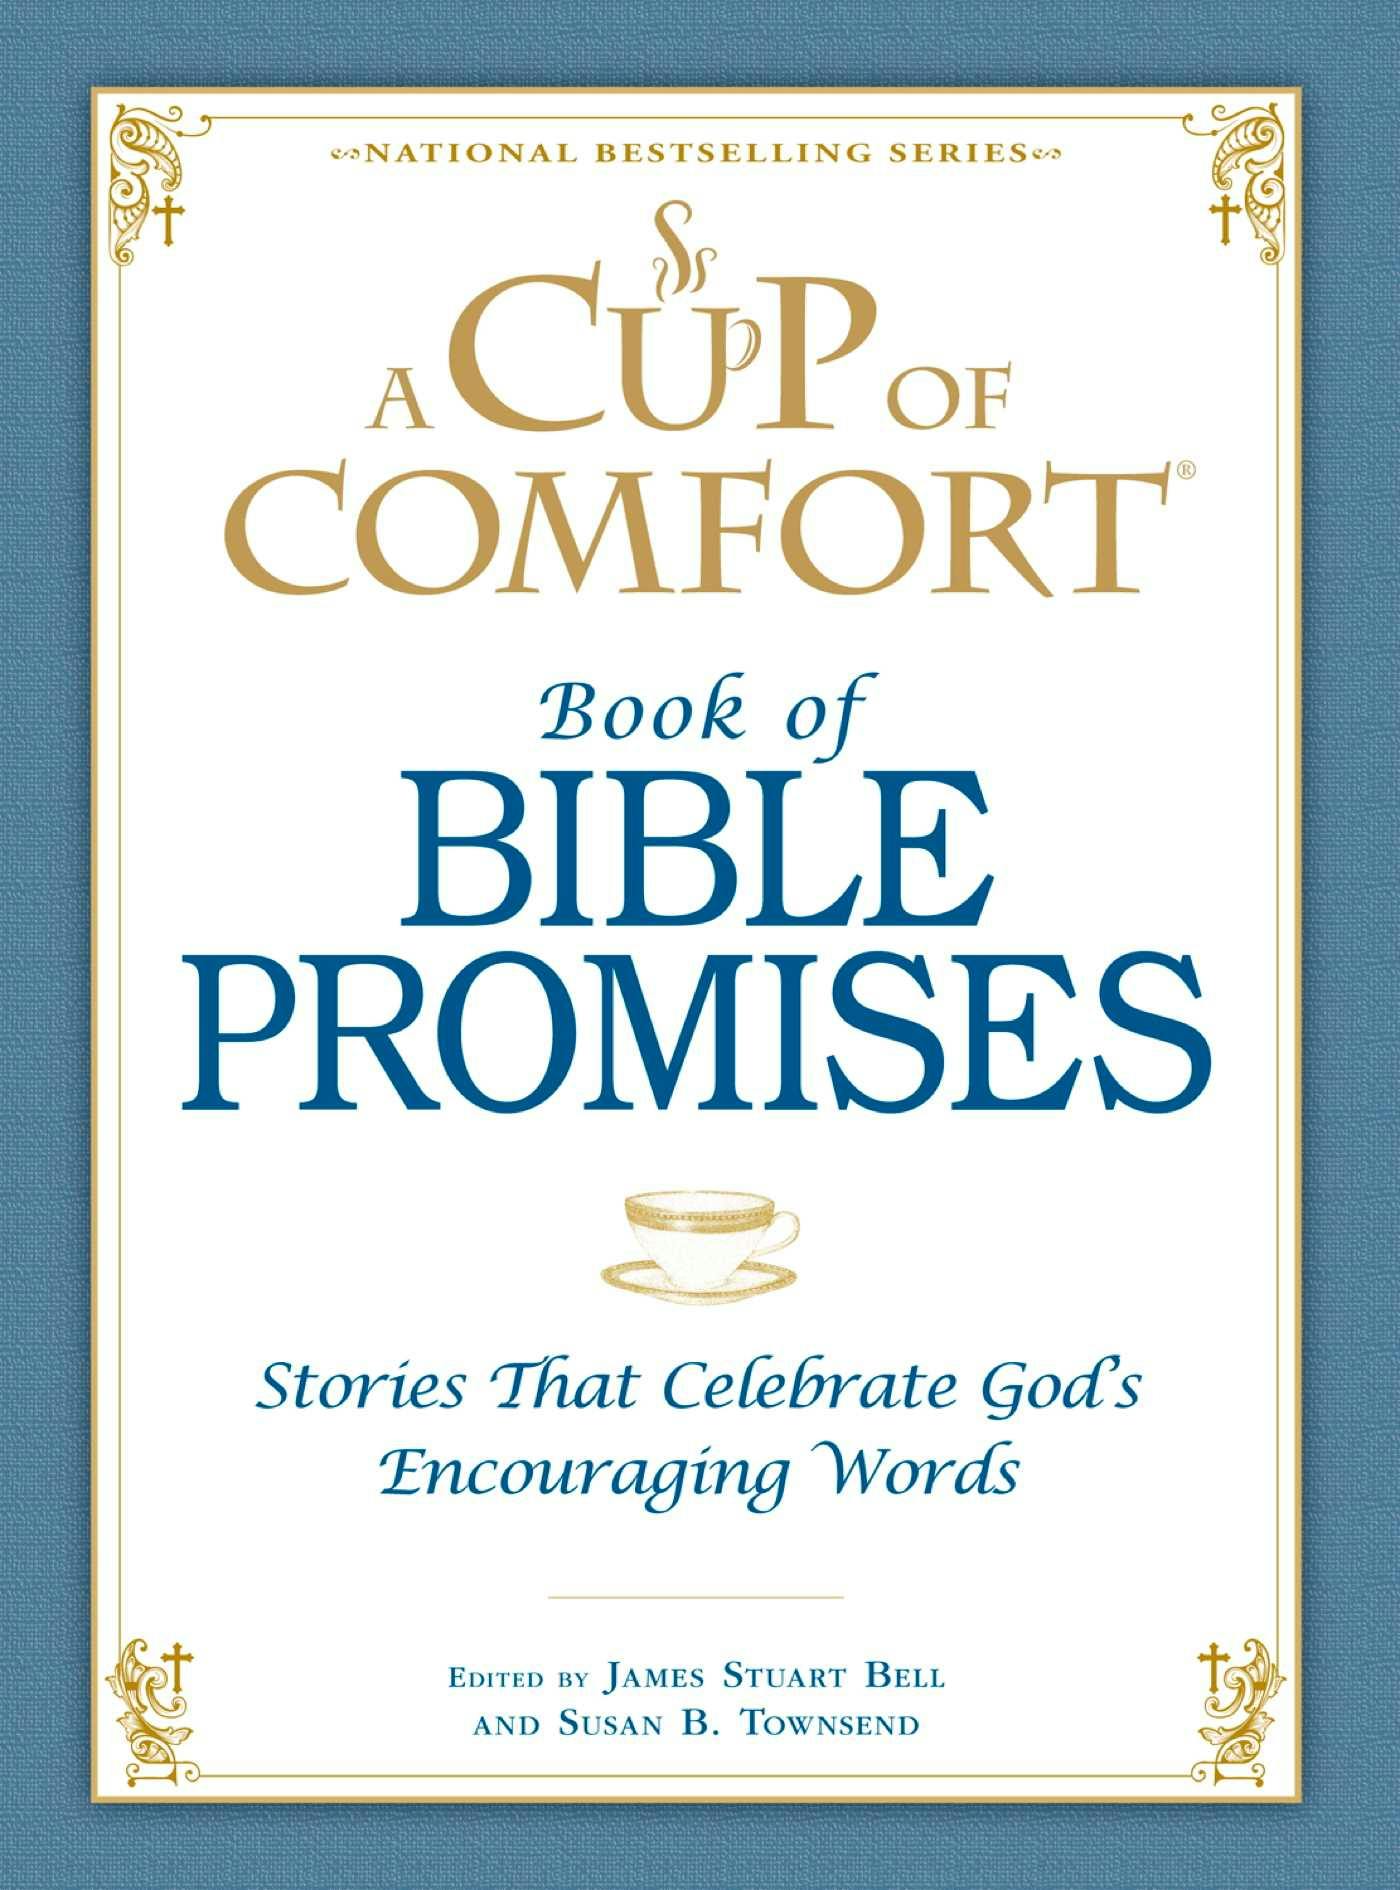 A Cup of Comfort Book of Bible Promises: Stories that celebrate God's encouraging words - James Stuart Bell, Susan B Townsend